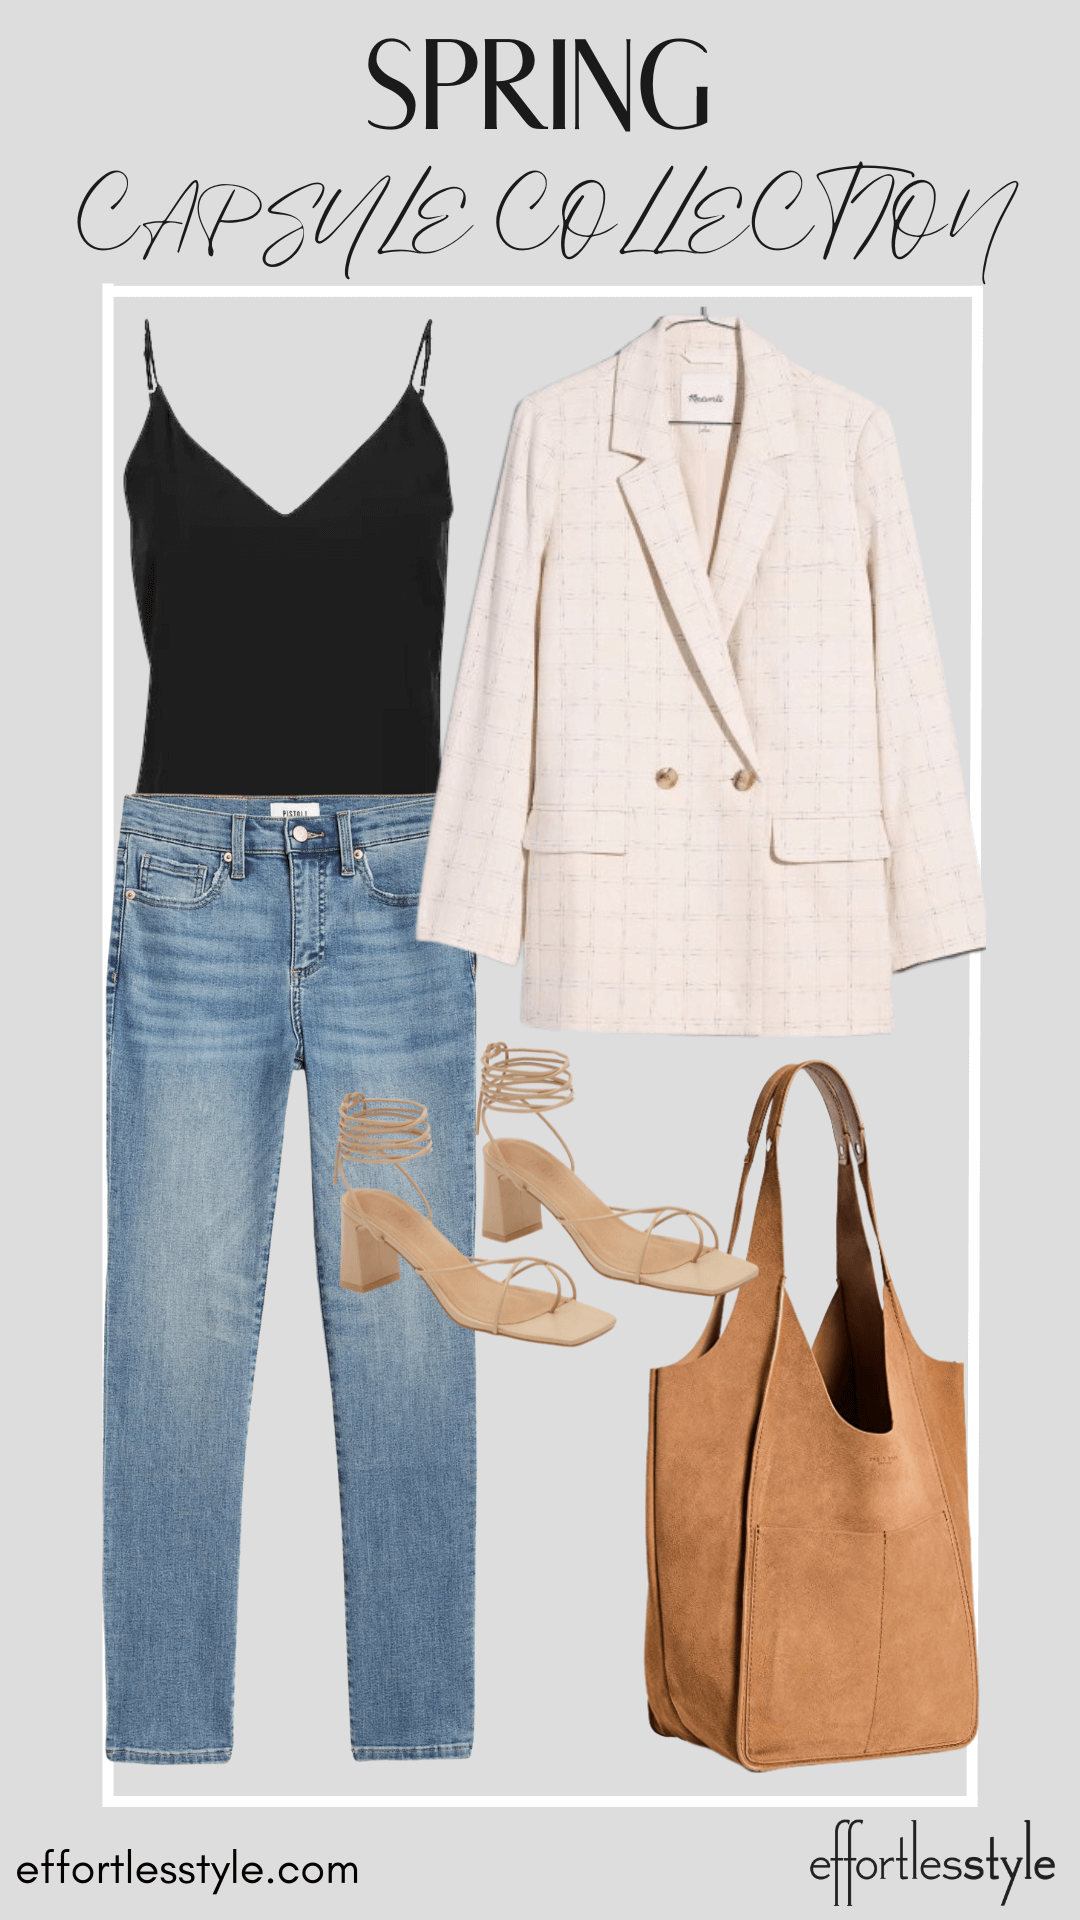 How To Wear Our Spring Capsule Wardrobe - Part 1 Neutral Blazer & Cami & Light Wash Jeans how to style a neutral blazer this spring Nashville area stylists share style inspiration for spring how to style a blazer with jeans how to wear a blazer to work